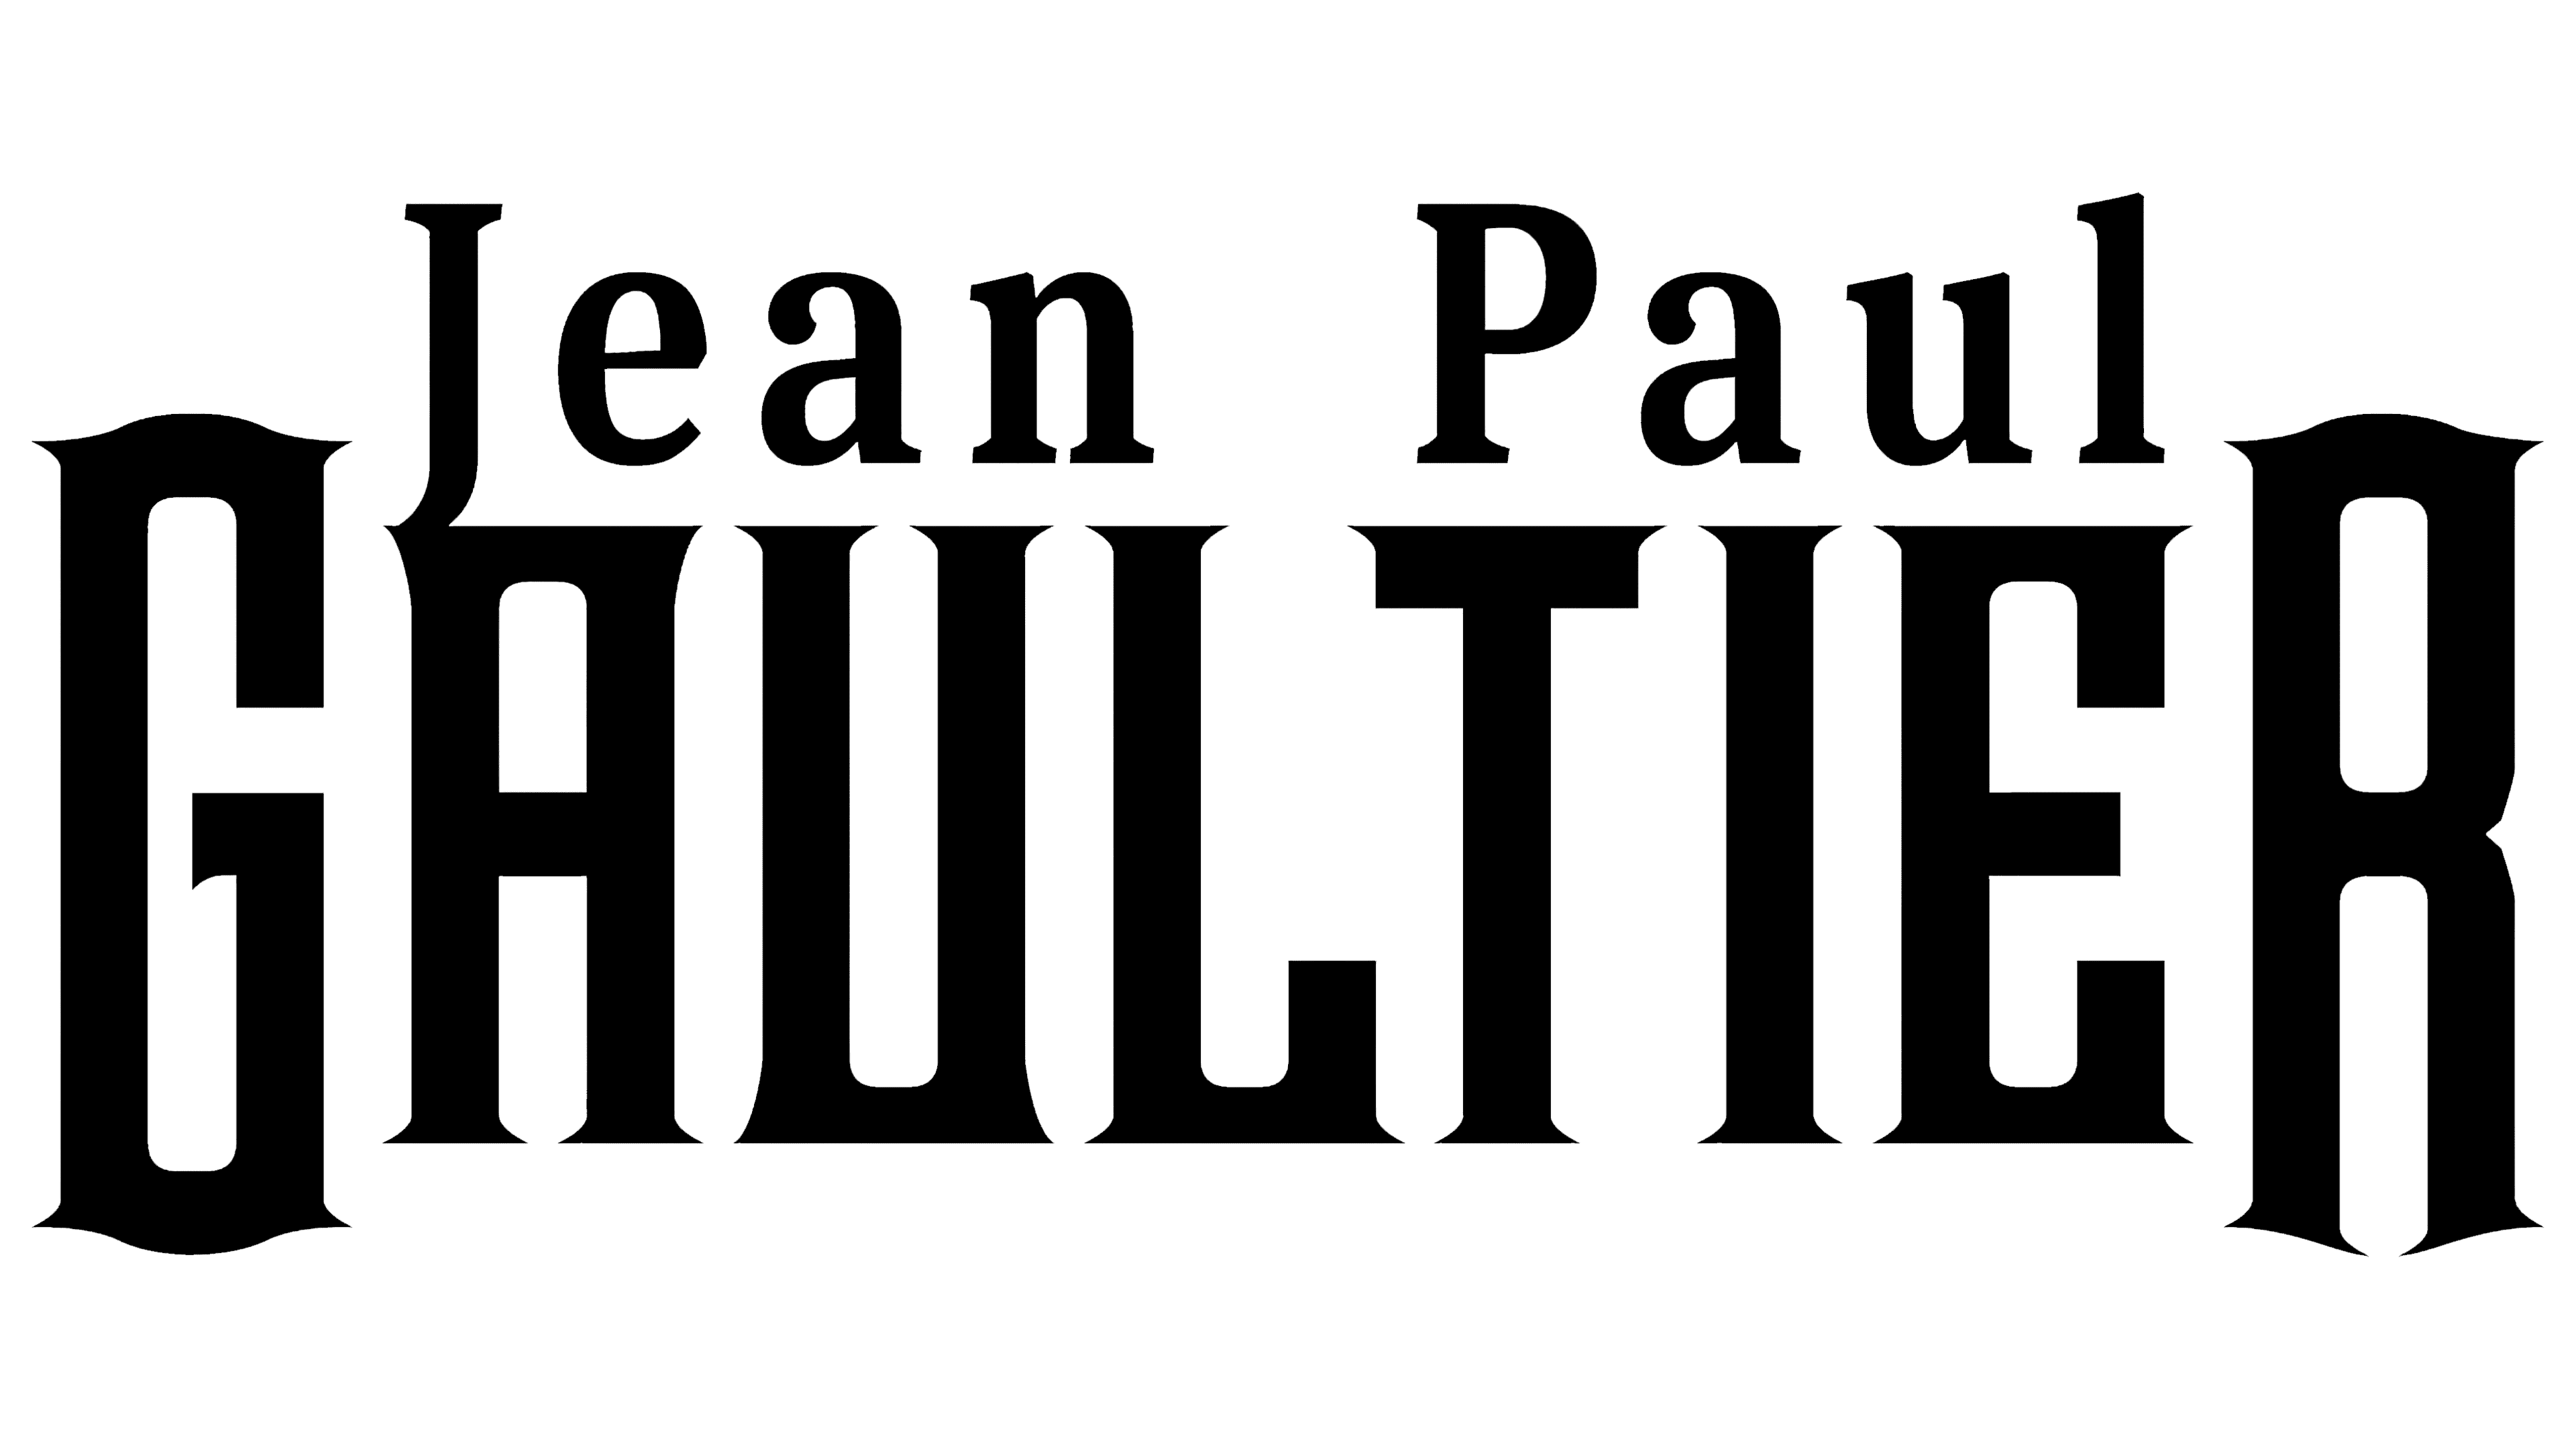 Jean-Paul Gaultier Logo, symbol, meaning, history, PNG, brand